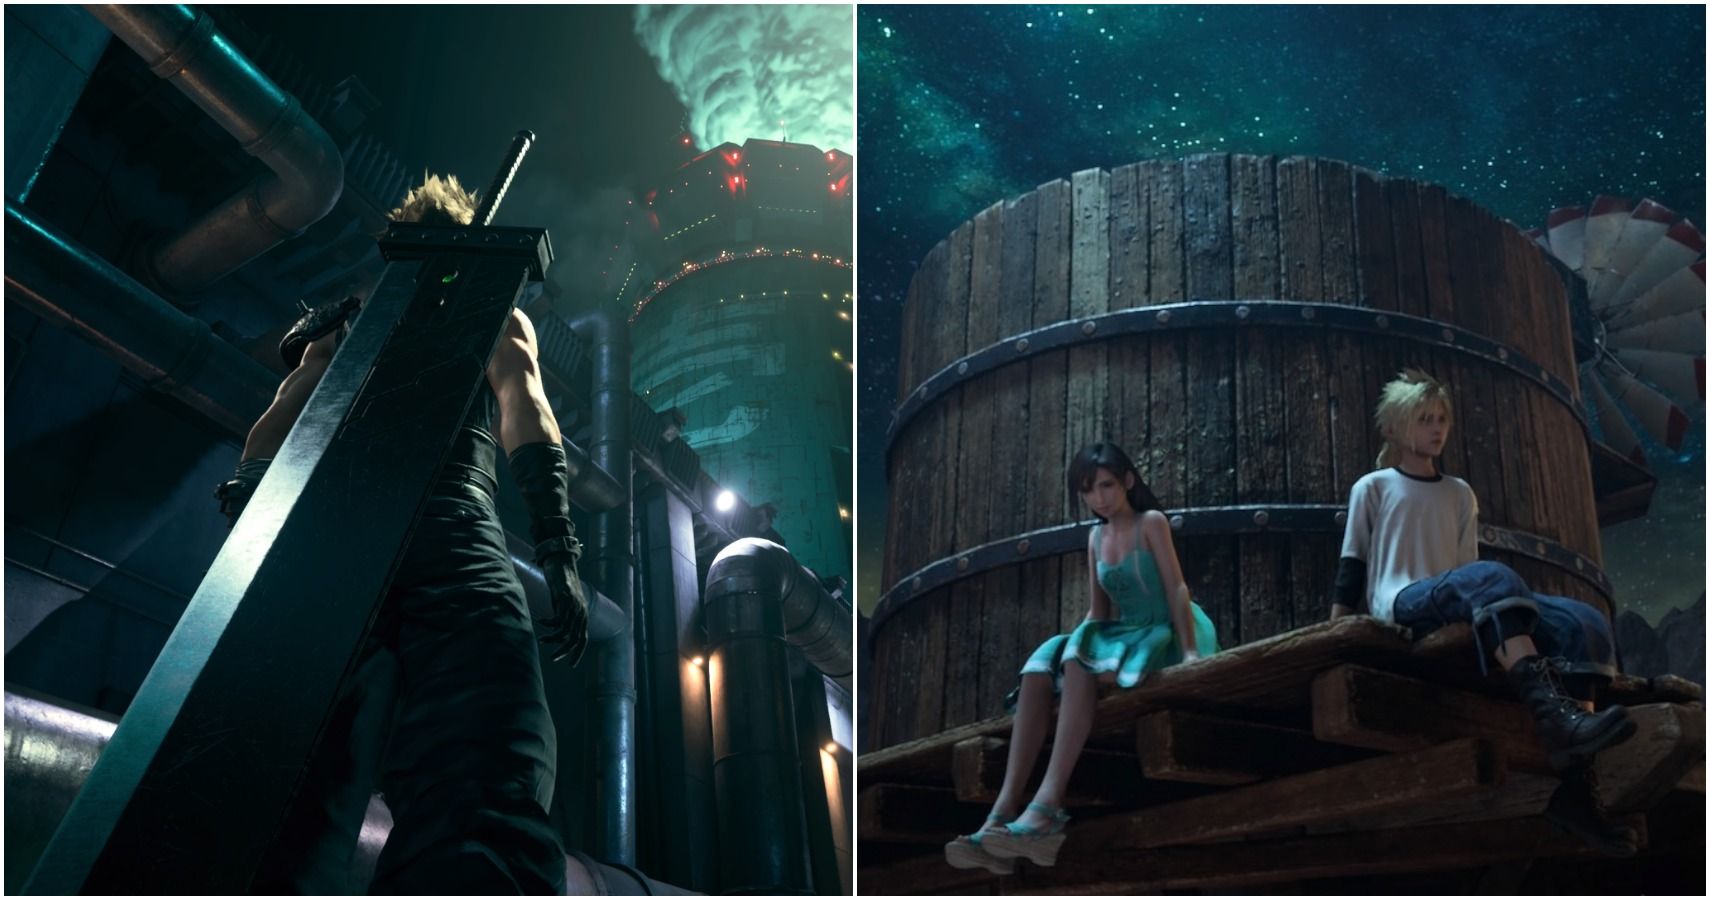 Final Fantasy VII Remake: 10 Songs & Music From The Original PS1 